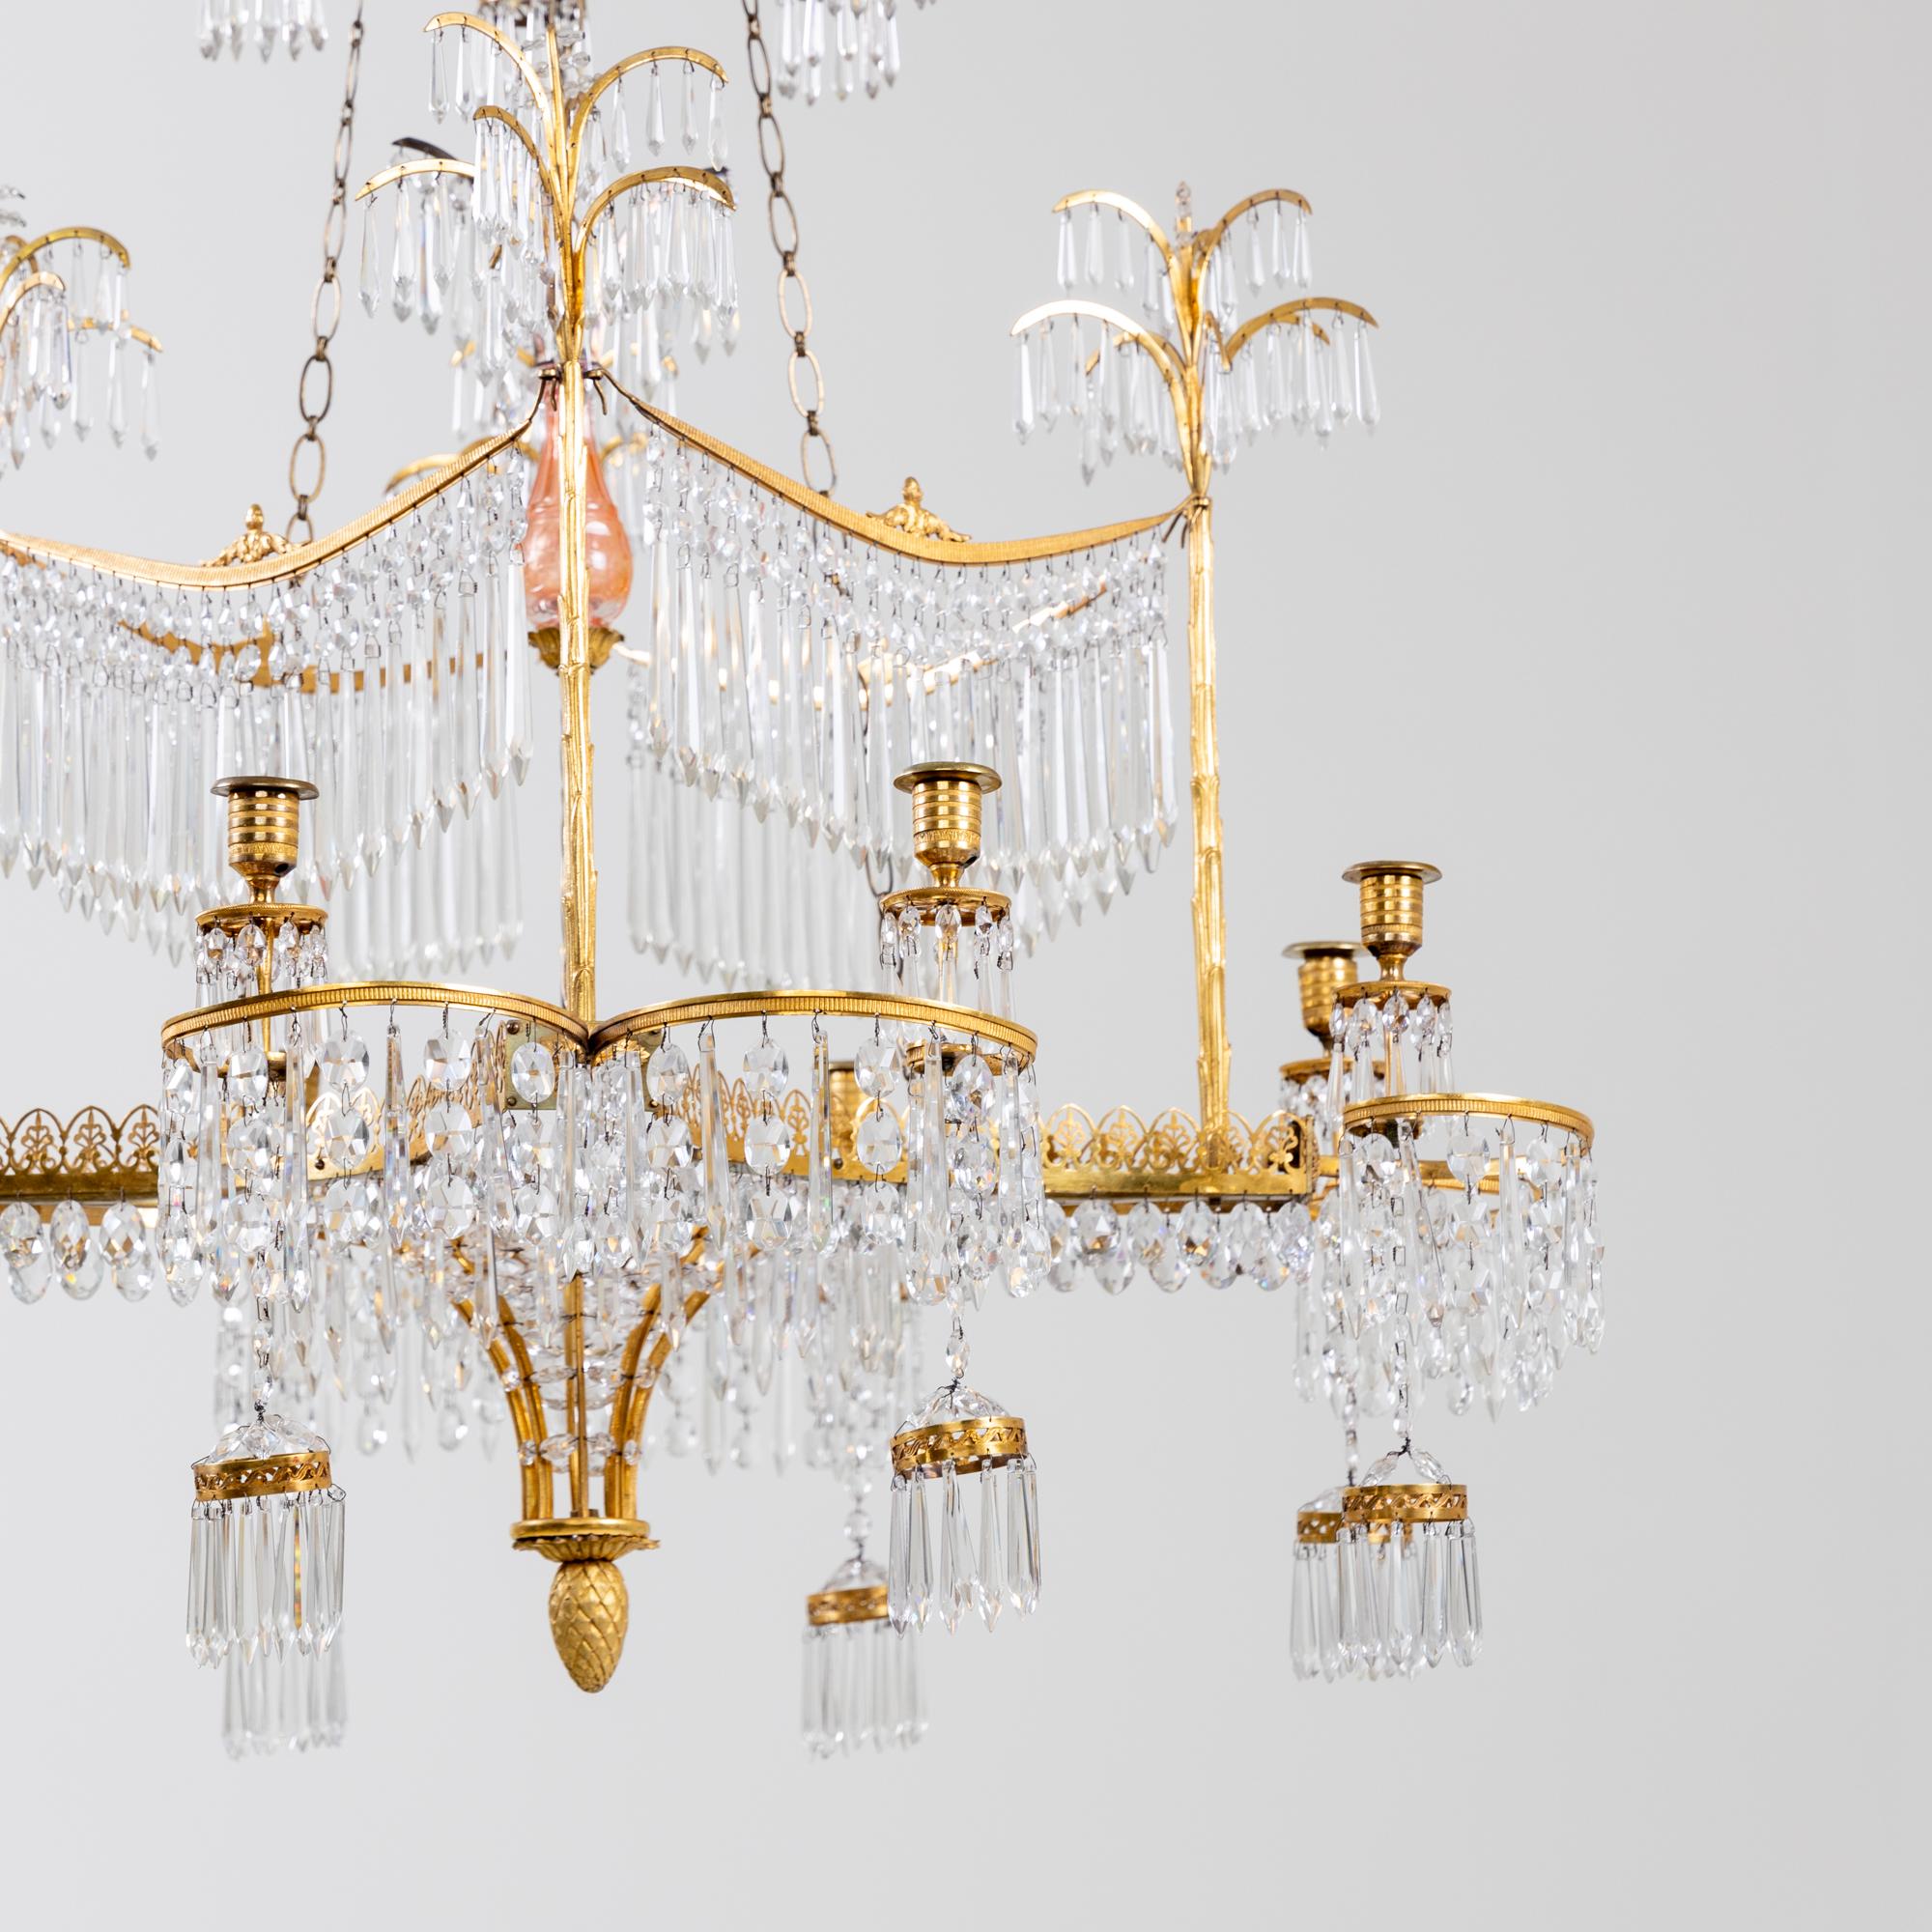 Early 19th Century Chandelier with Palm Trees, Werner & Mieth, Berlin c. 1800-1810 For Sale